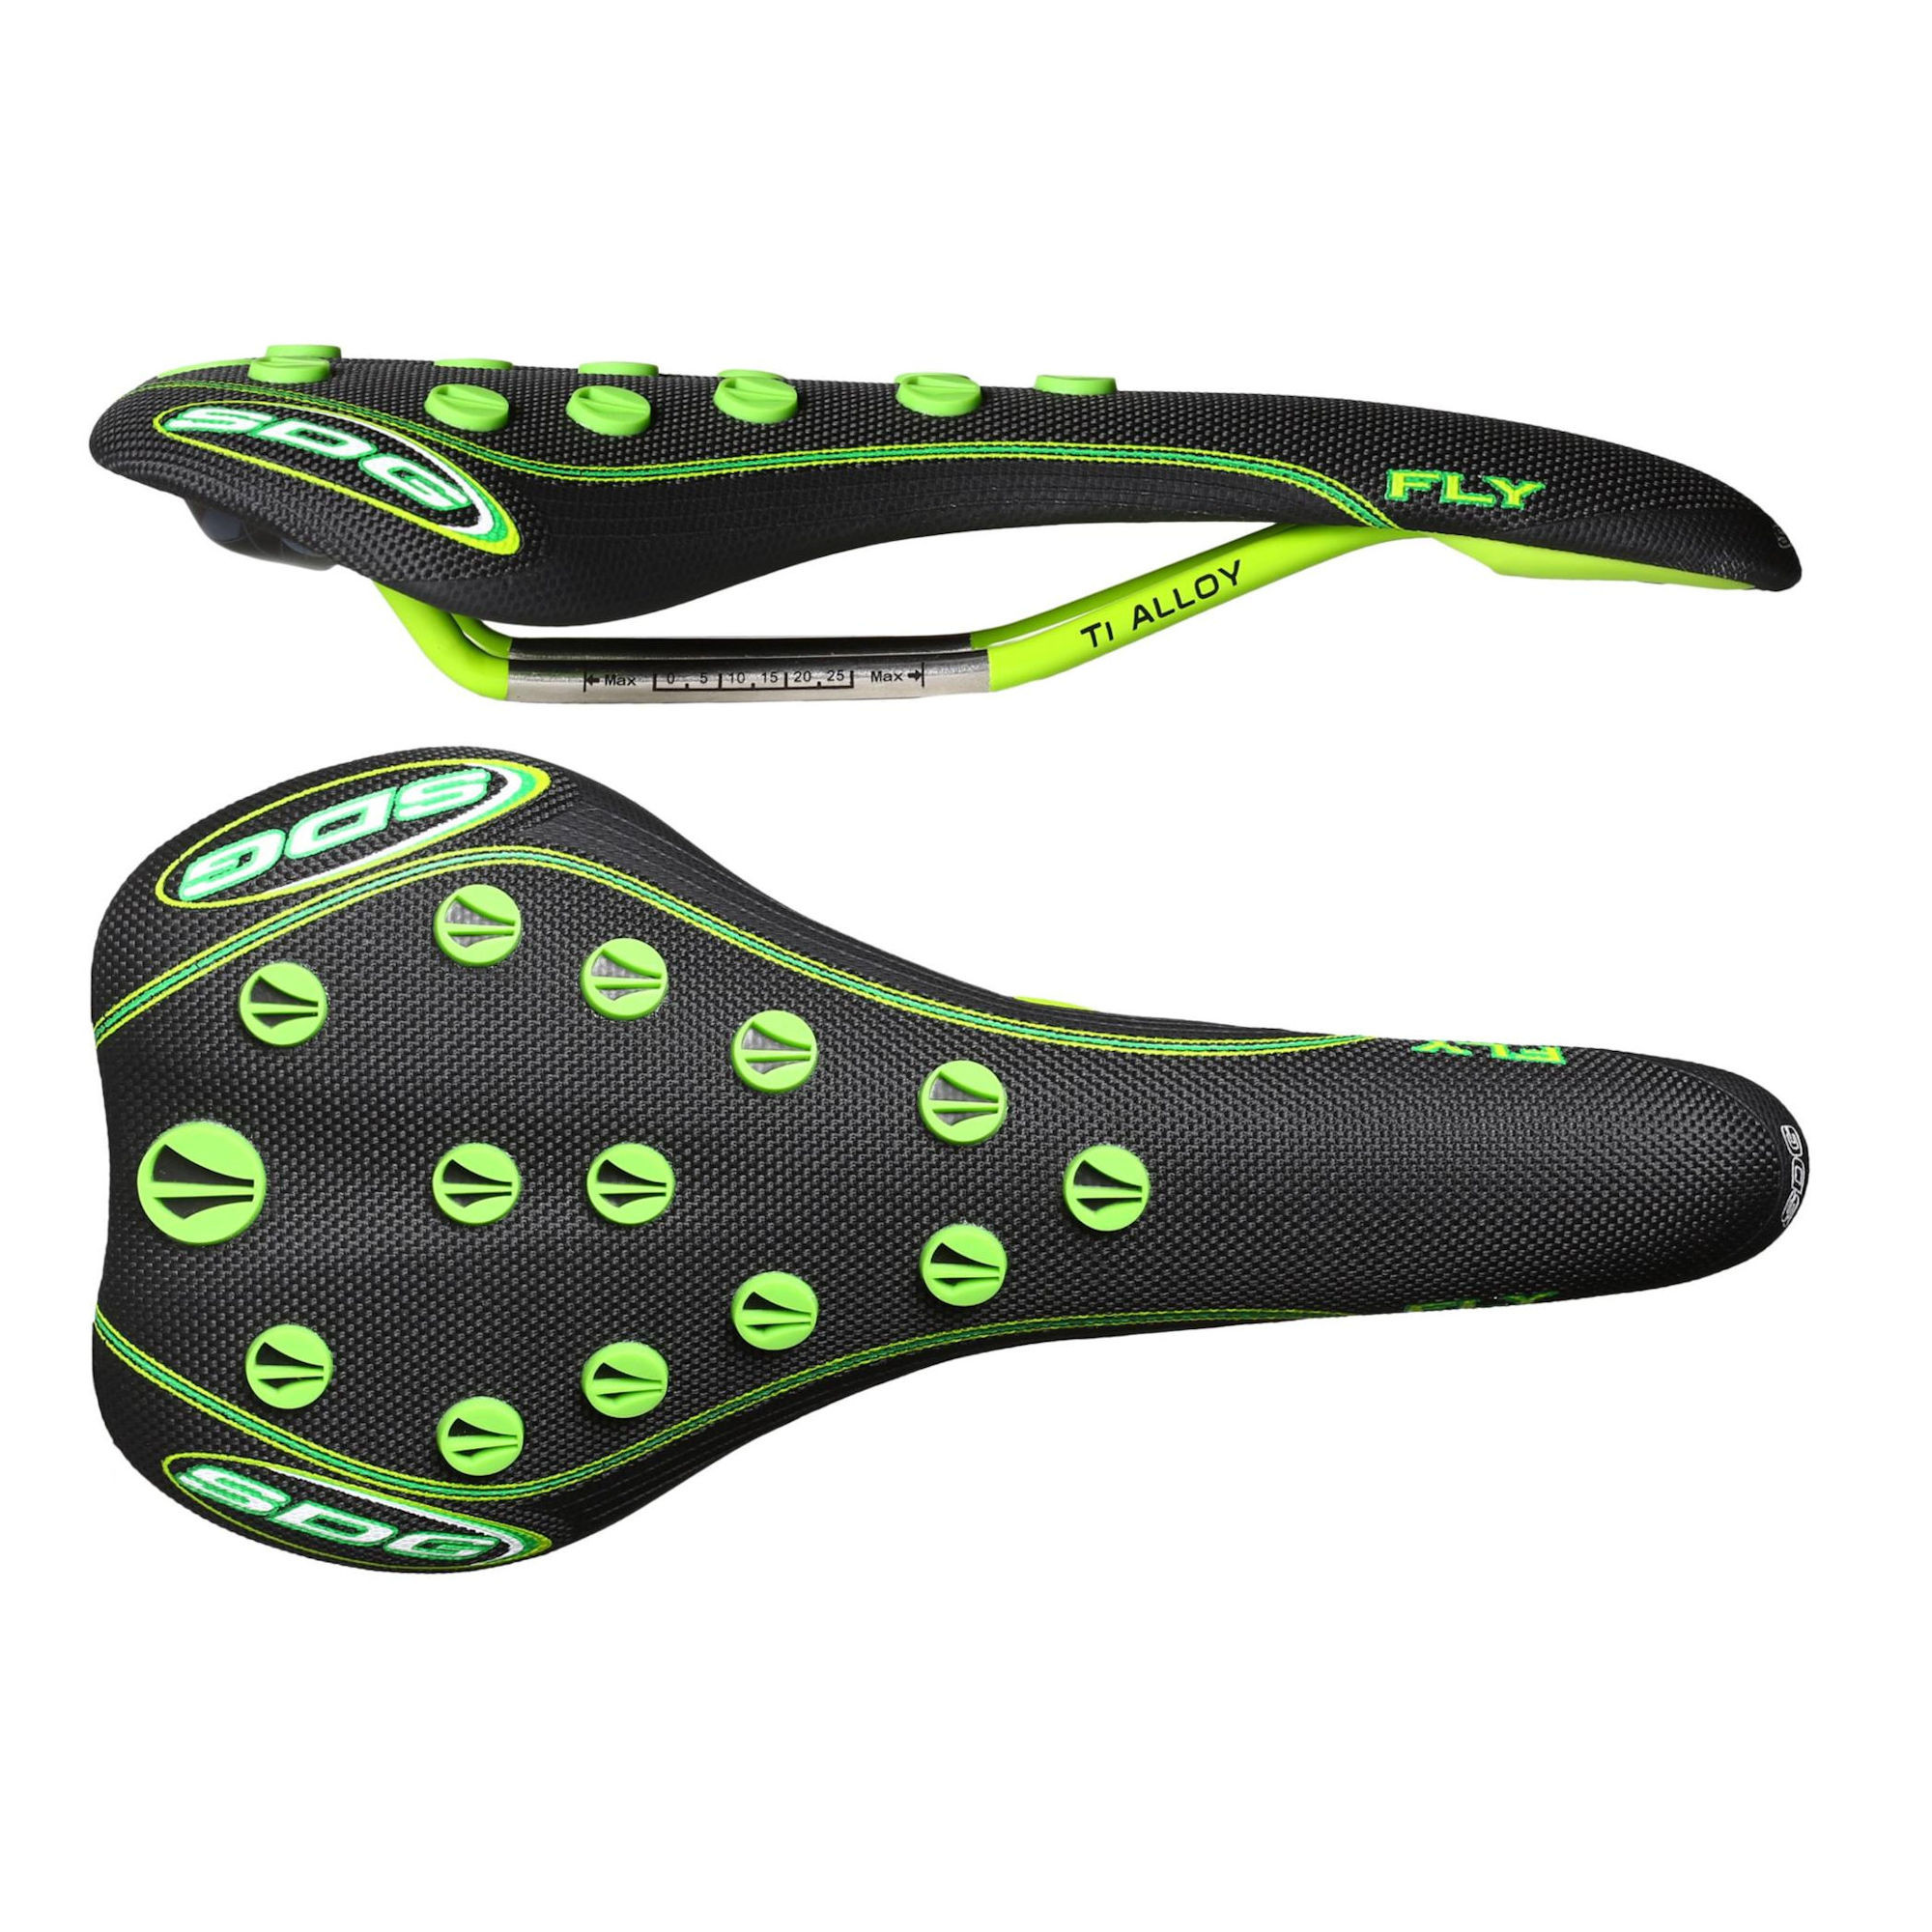 SDG Saddle FLY Ti-Alloy Storm All Weather Black/Green (06415)